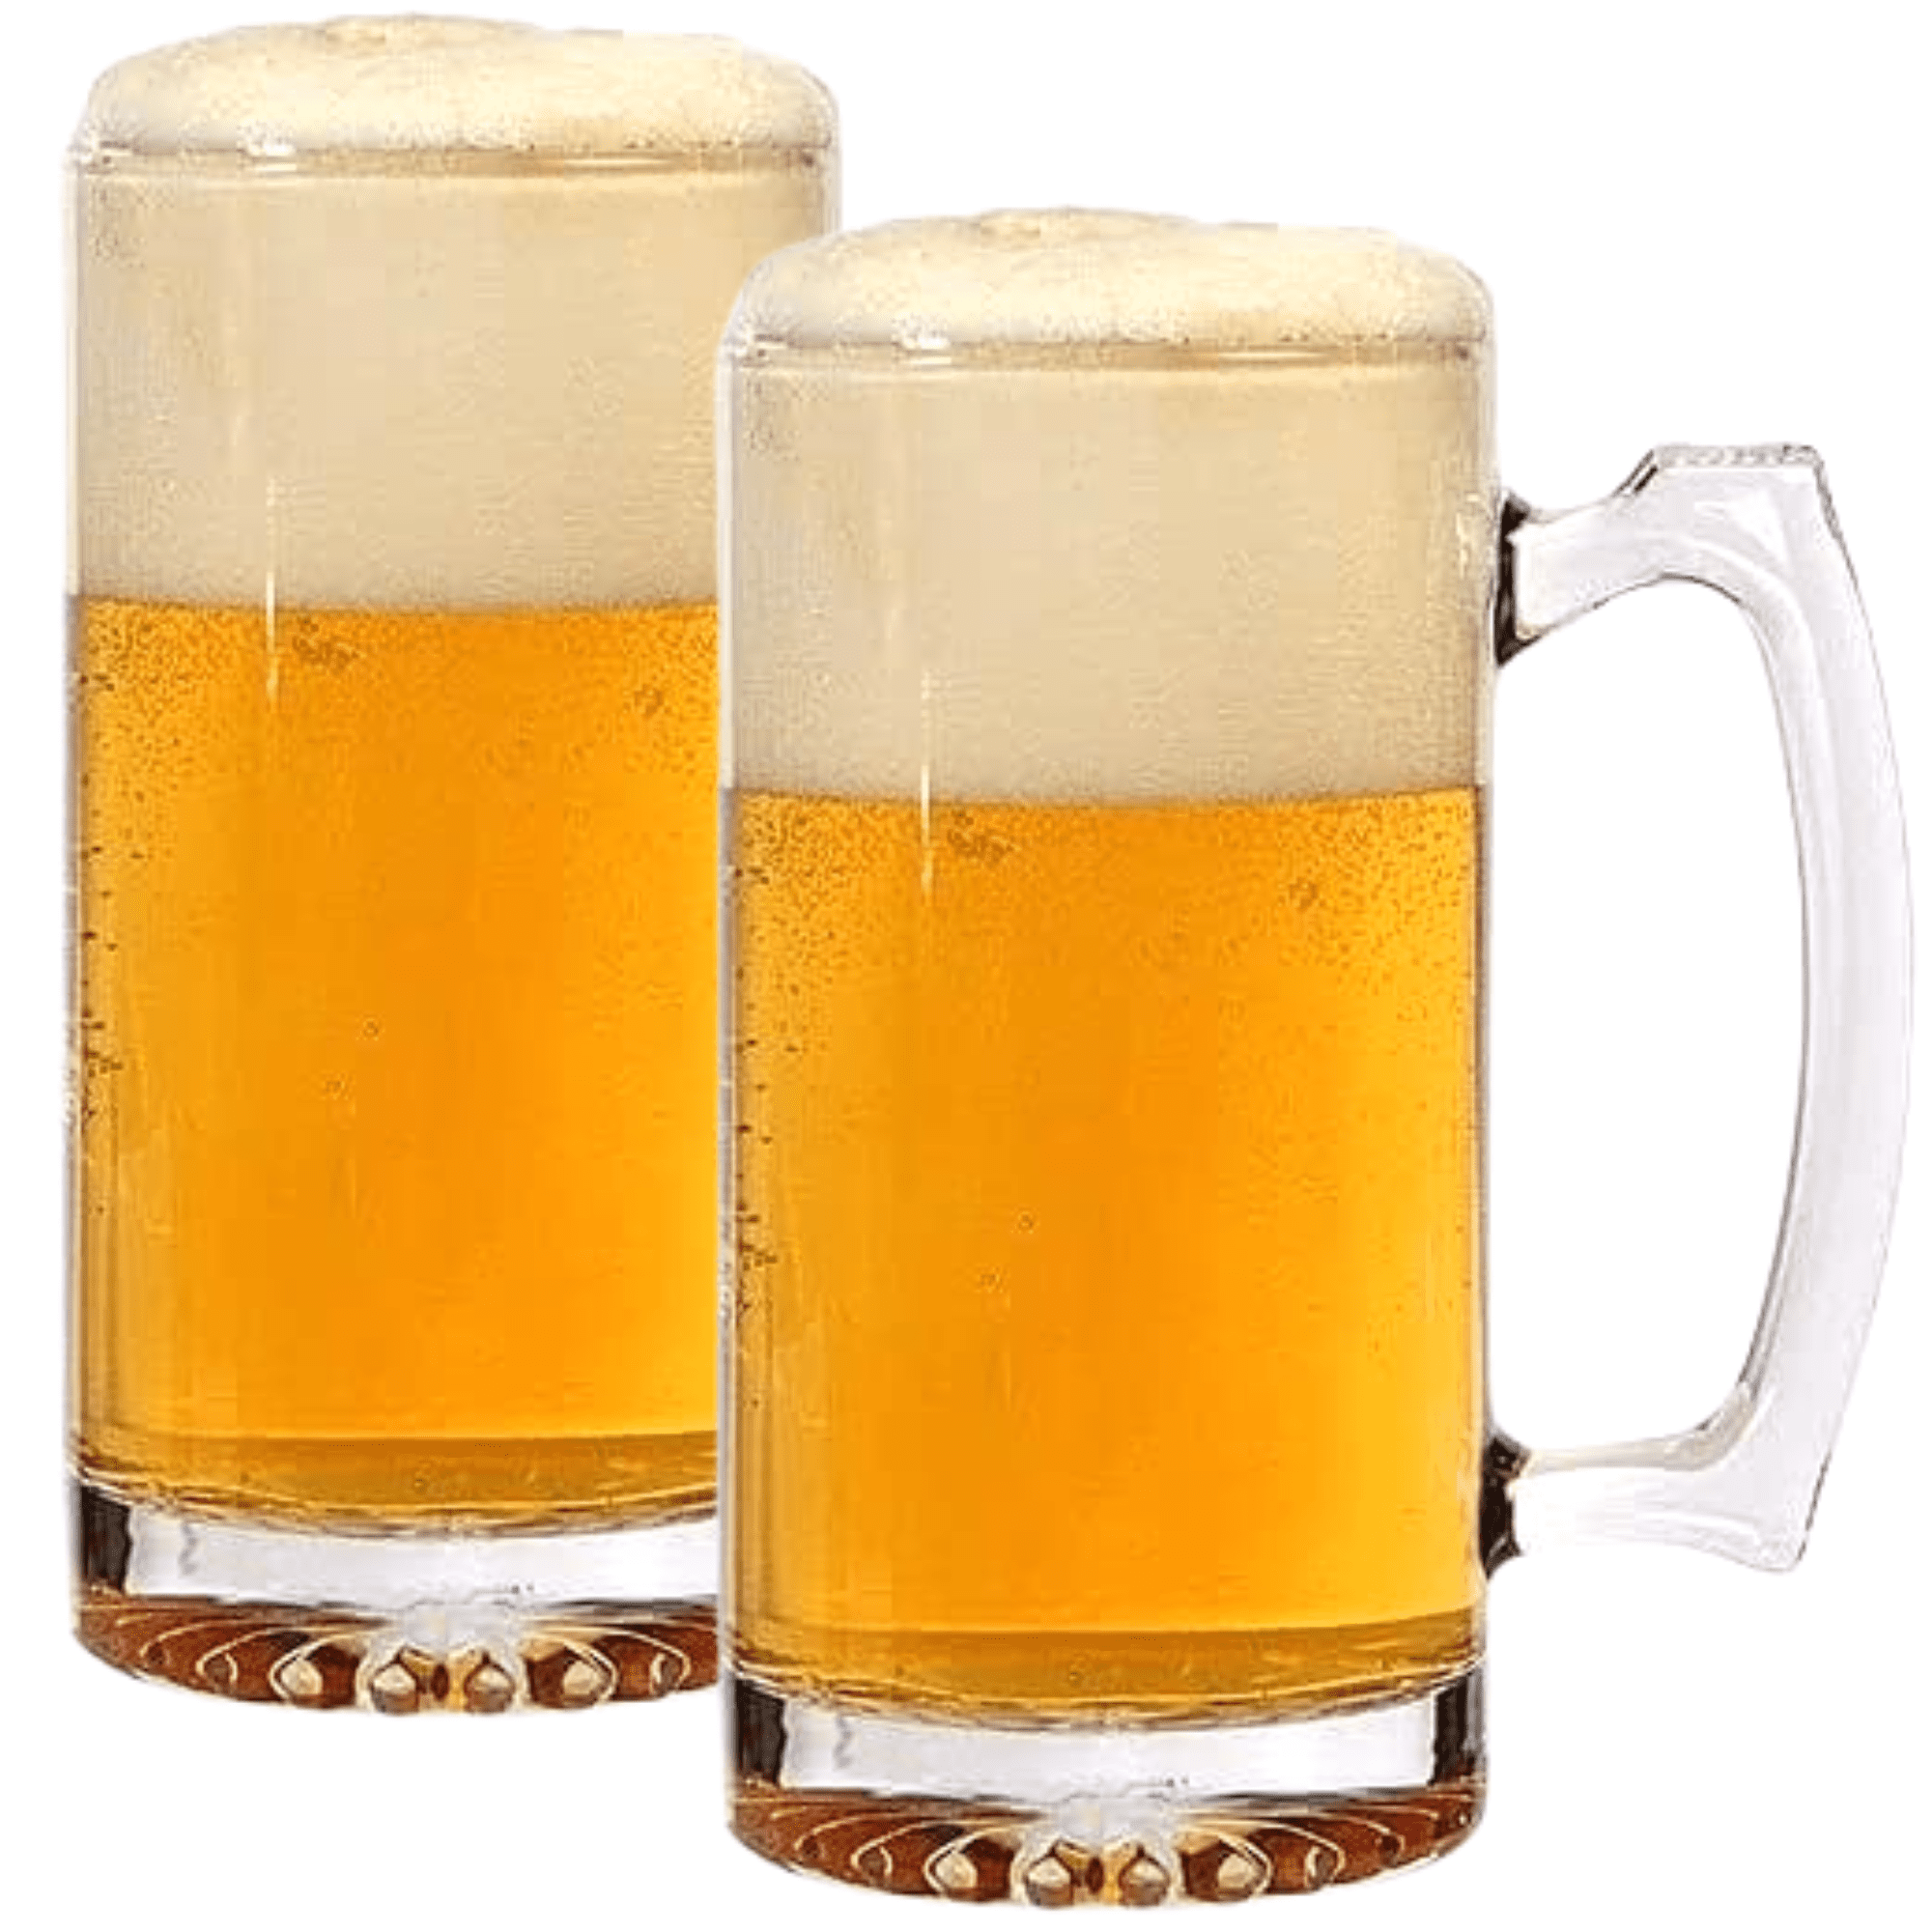 1000ml Beer Glasses Mug Large Capacity Thick Beer Mug Glass Crystal Glass  Cup Transparent With Handle For Club Bar Party Home - Glass - AliExpress